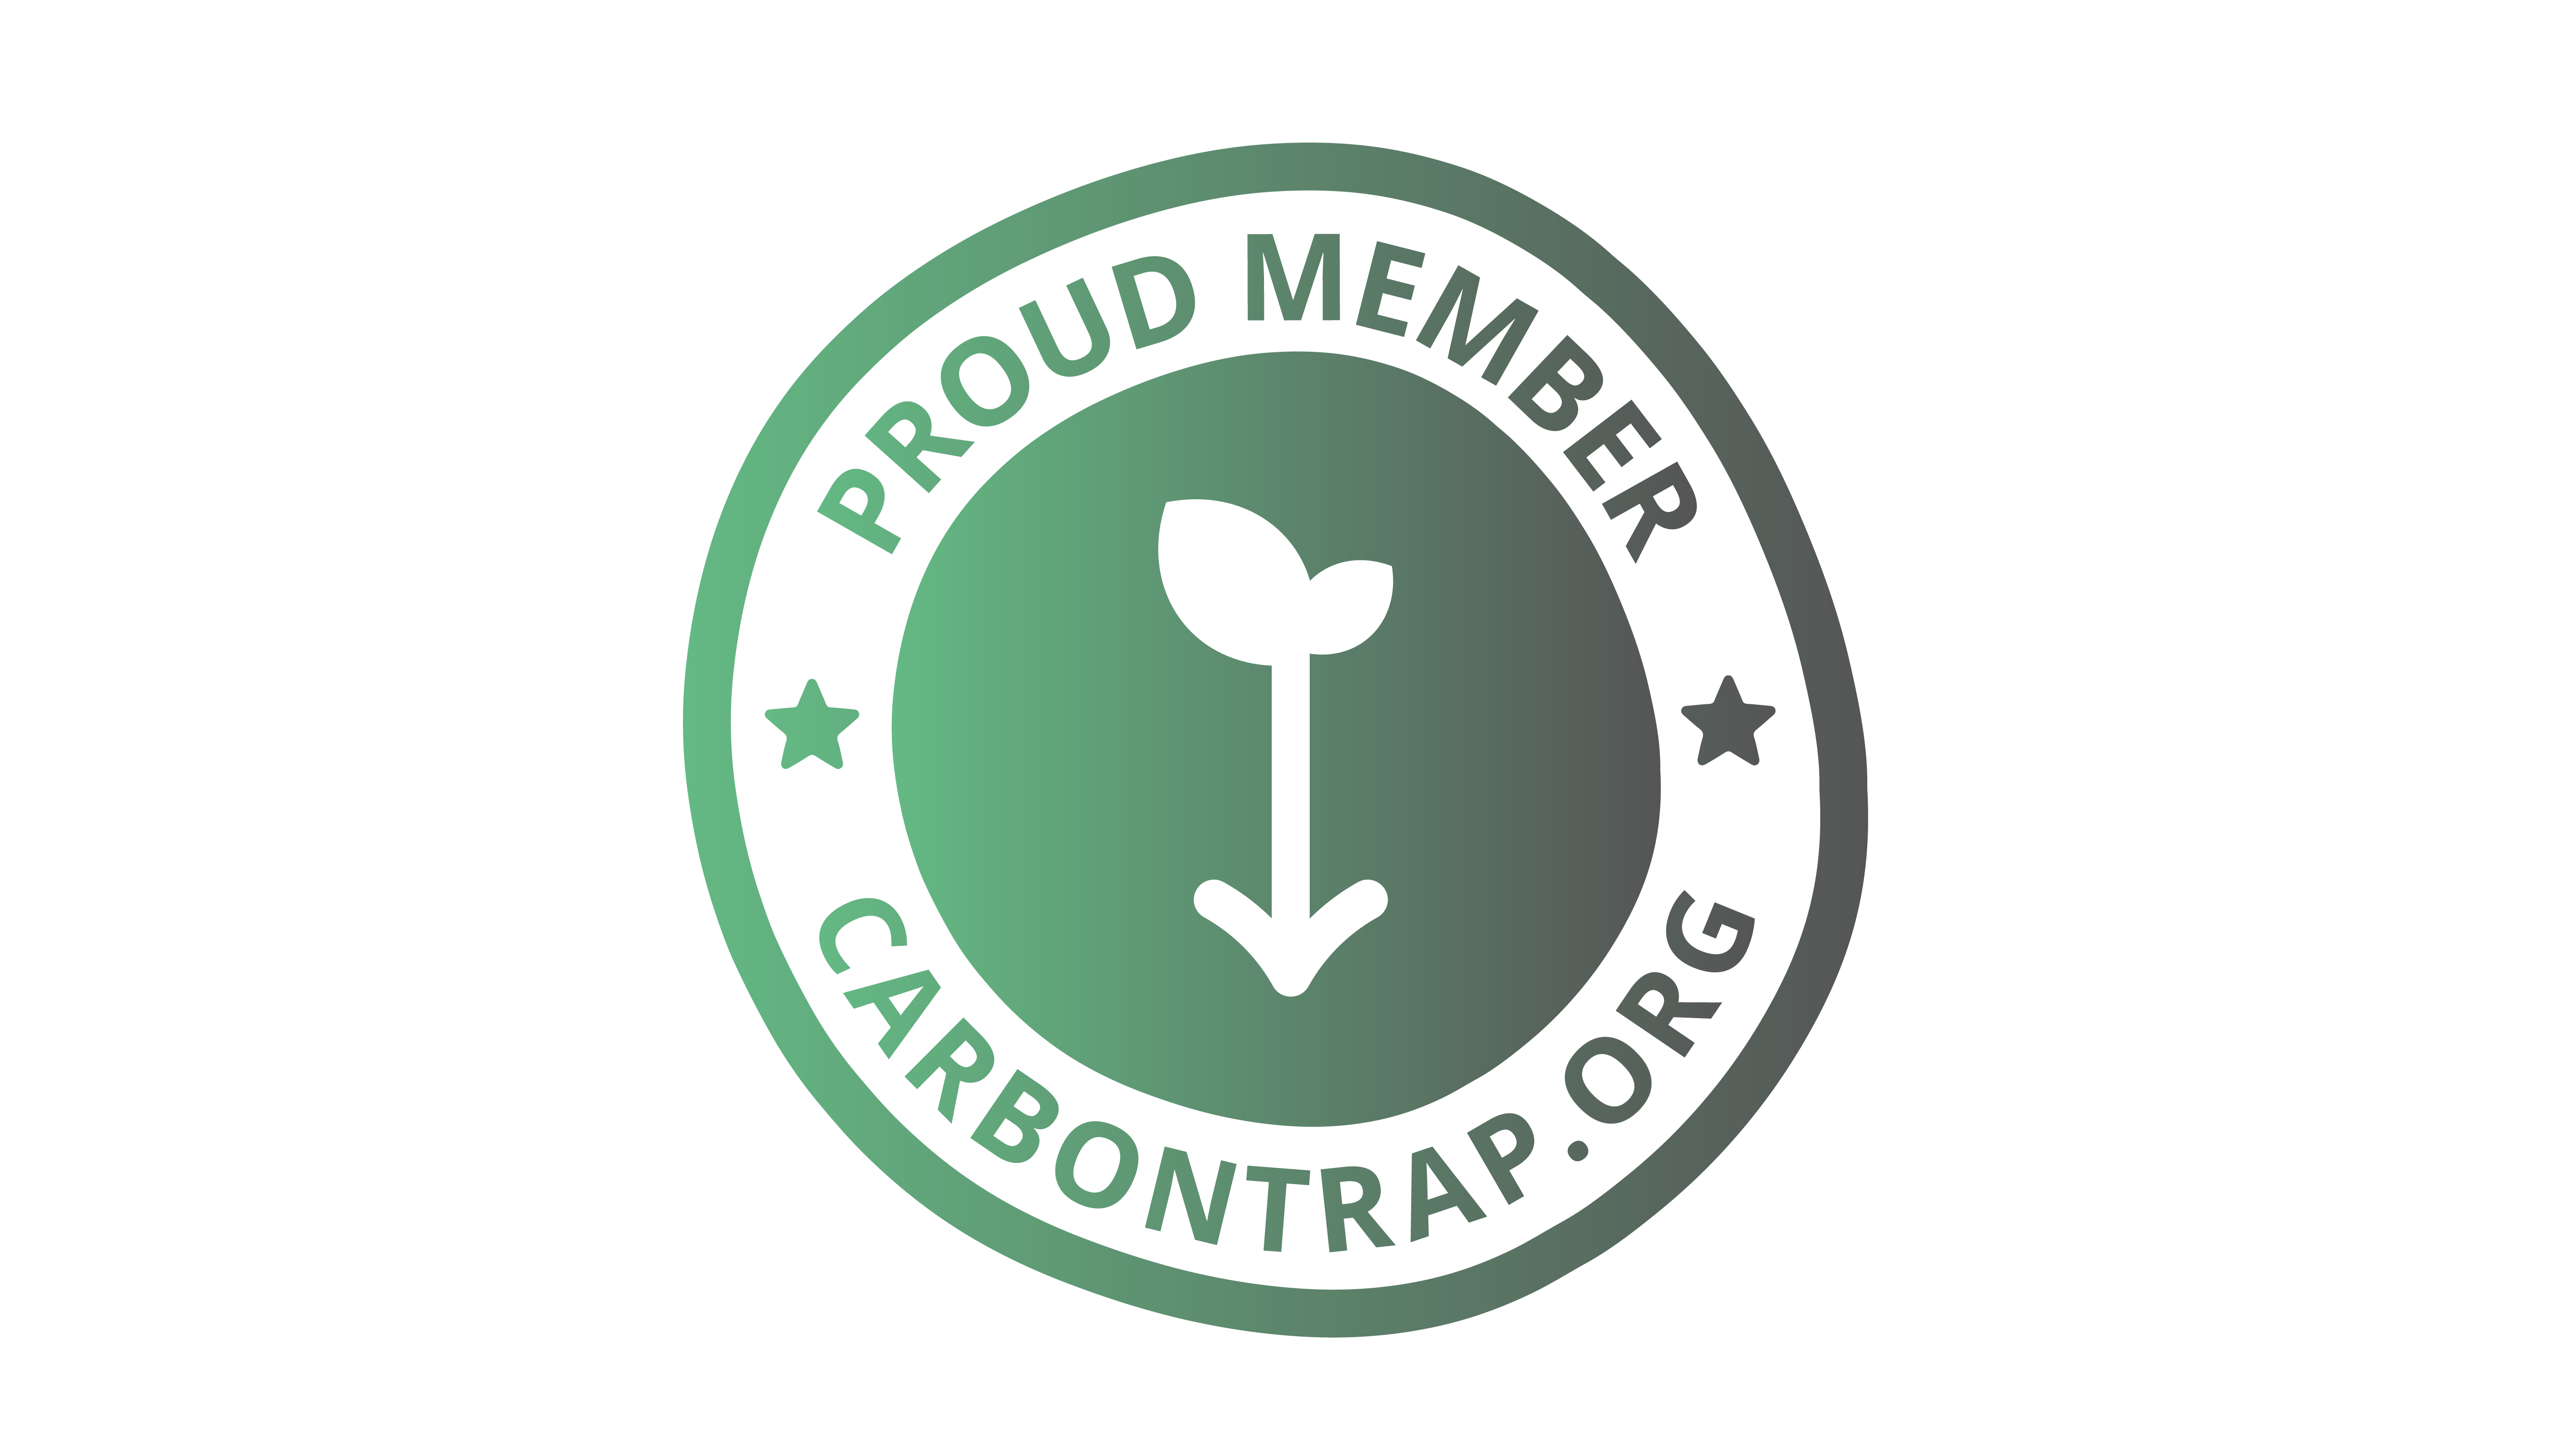 The Carbon Trap members logo